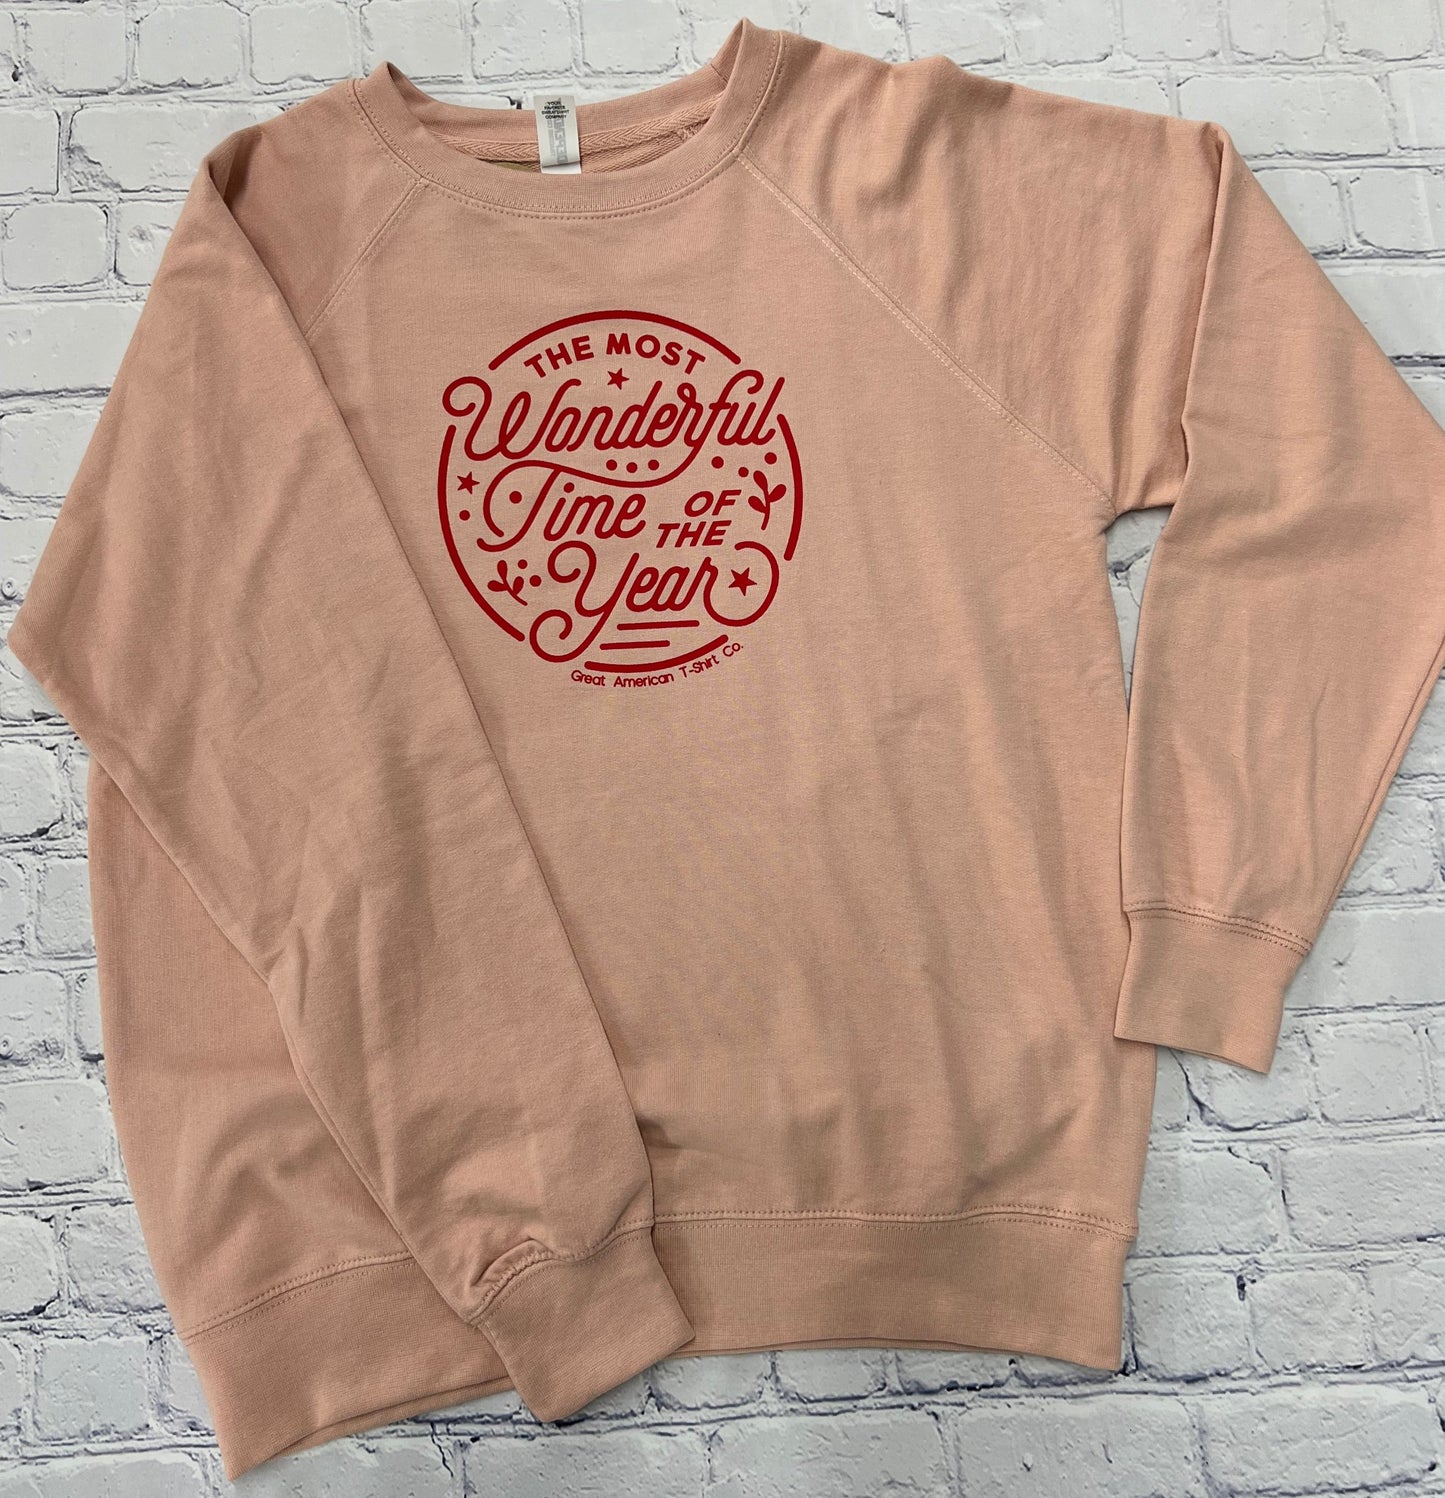 The Most Wonderful Time of the Year Graphic Sweatshirt